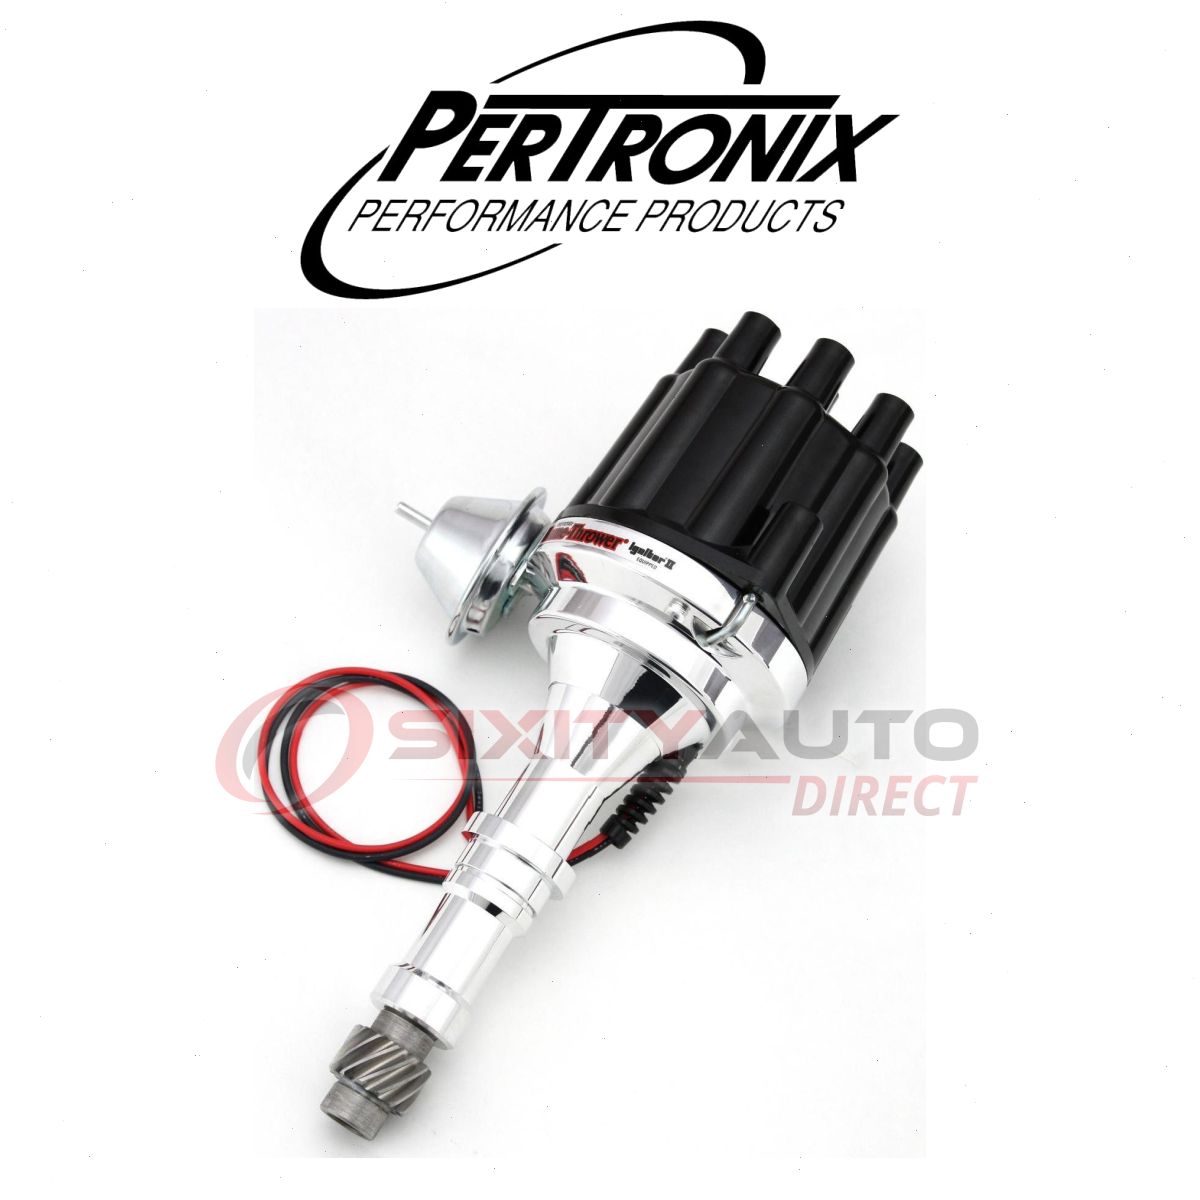 PerTronix Distributor for 1970-1972 Buick GS 5.7L V8 - Ignition